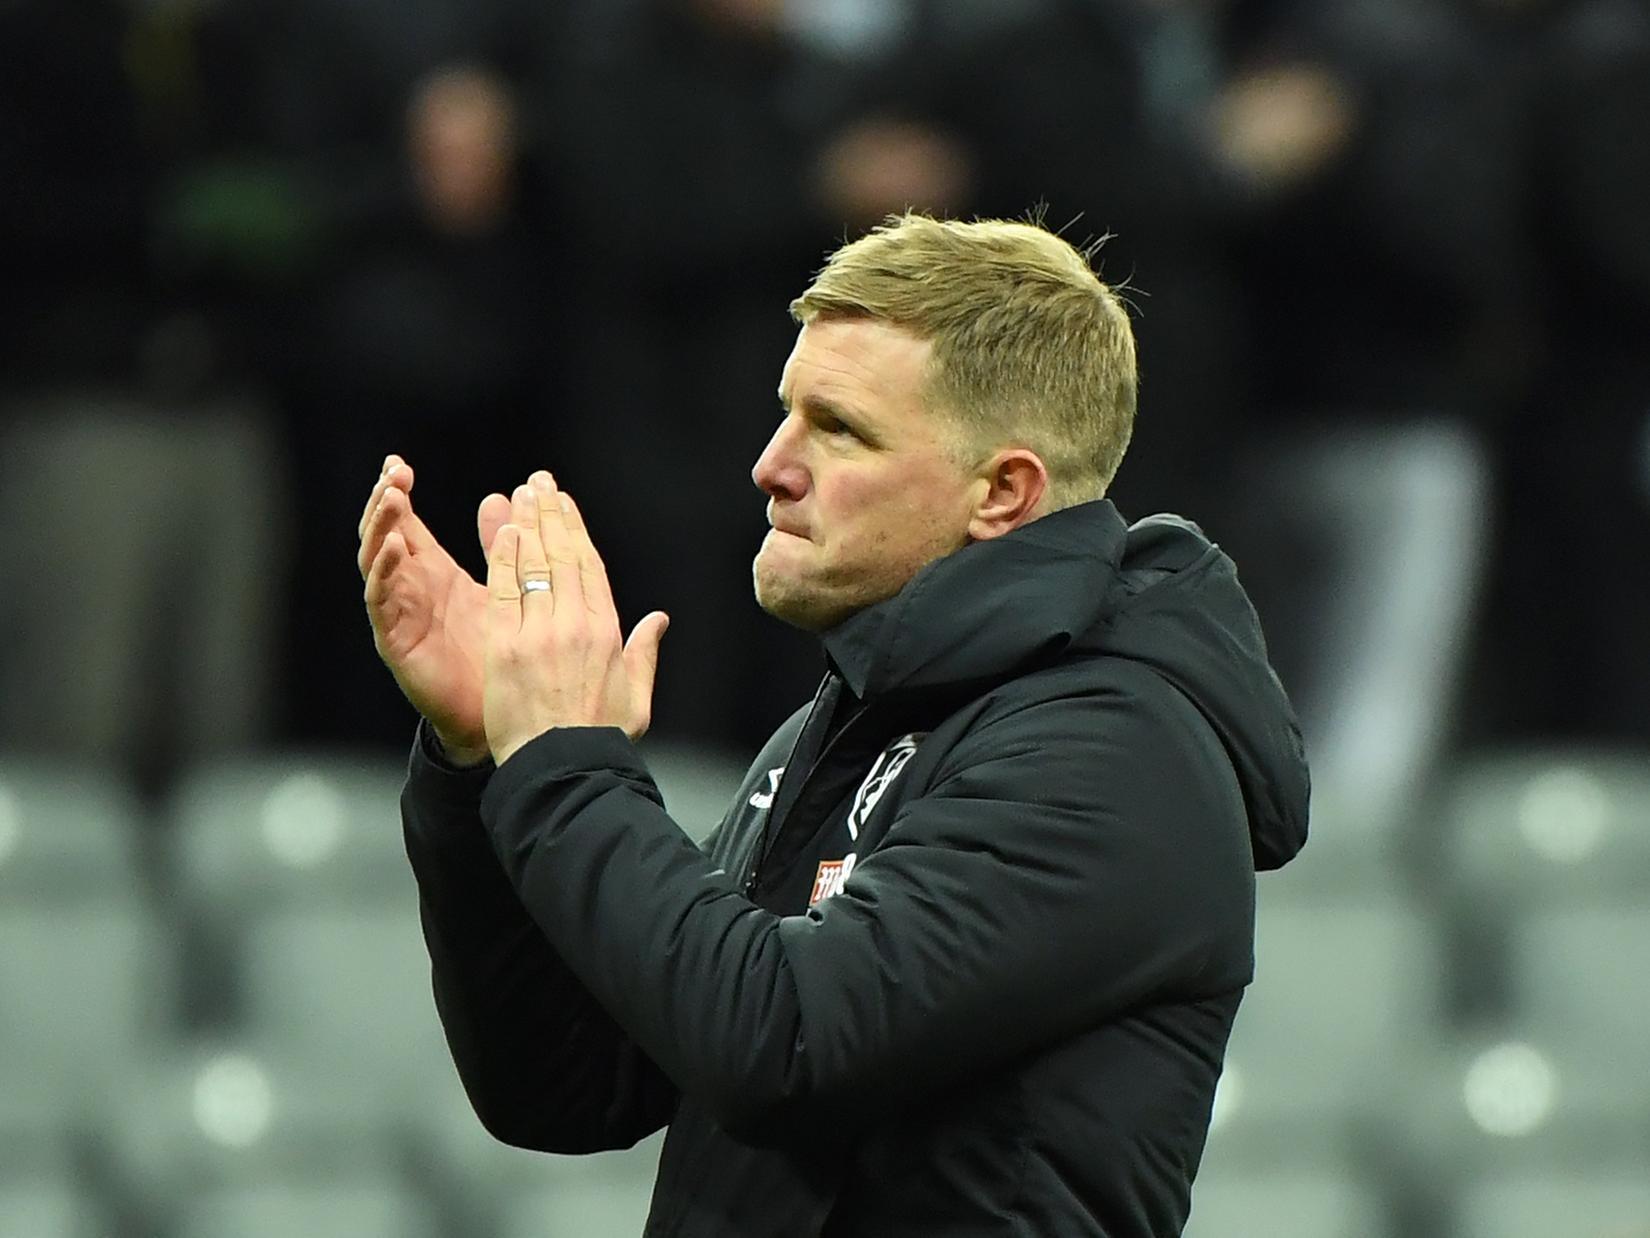 Eddie Howe has patiently built an excellent squad of players, but with one win in five he'll be eager for them to kick on after the international break.